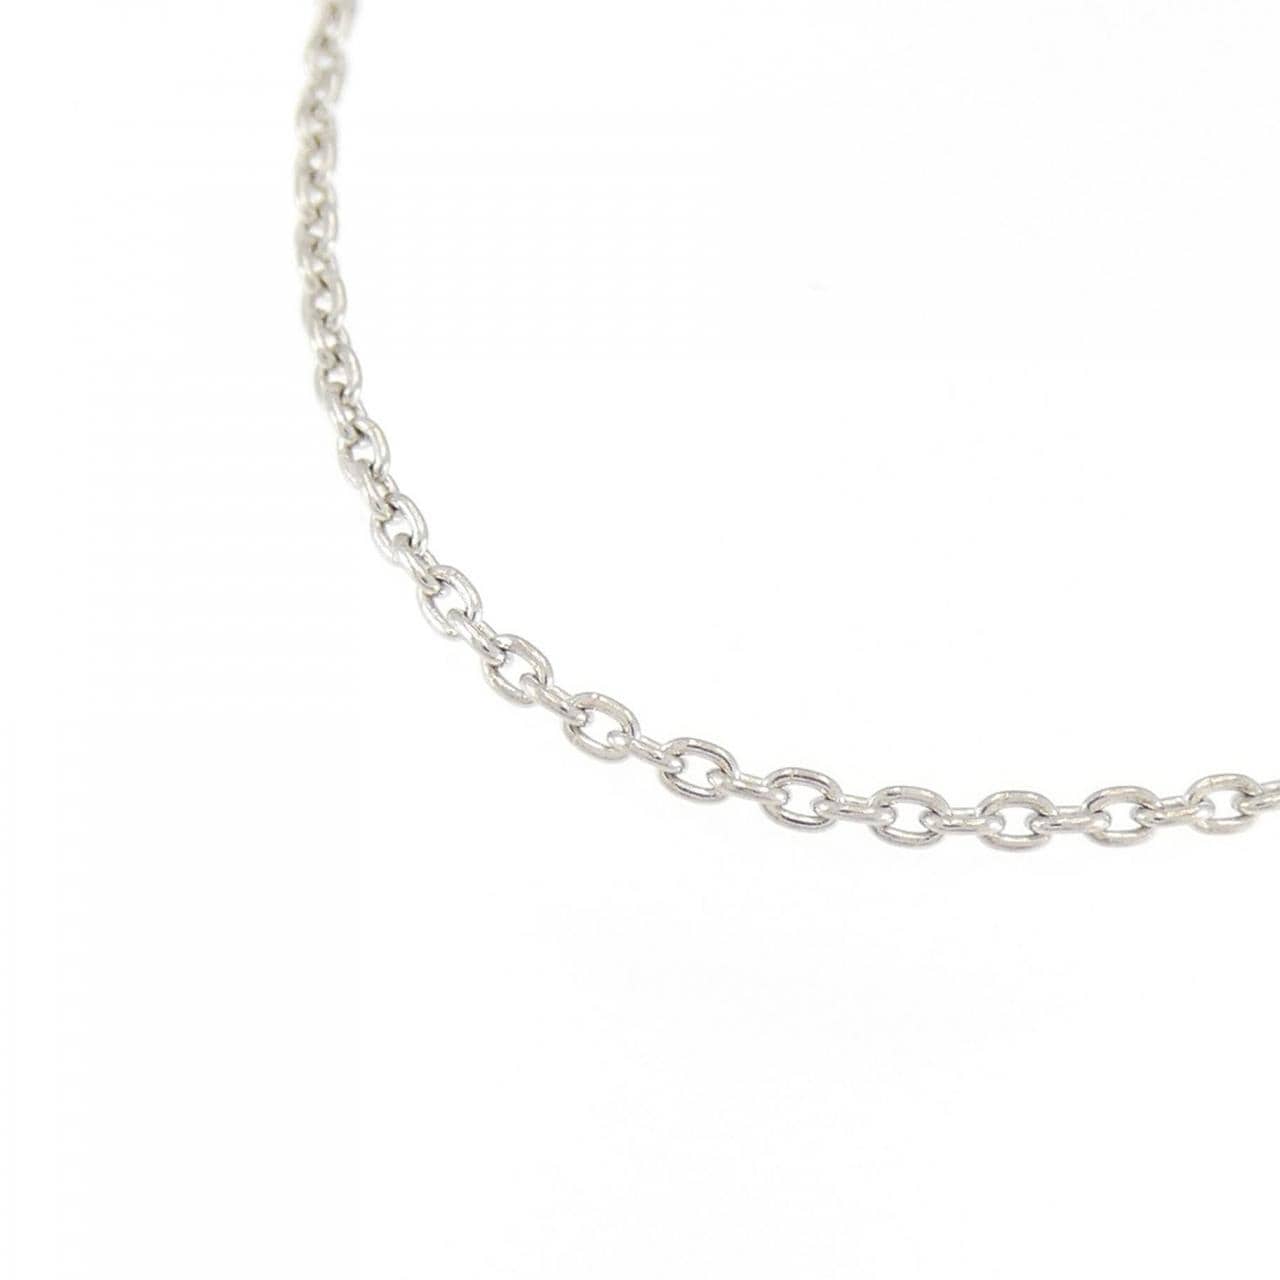 K18WG chain necklace